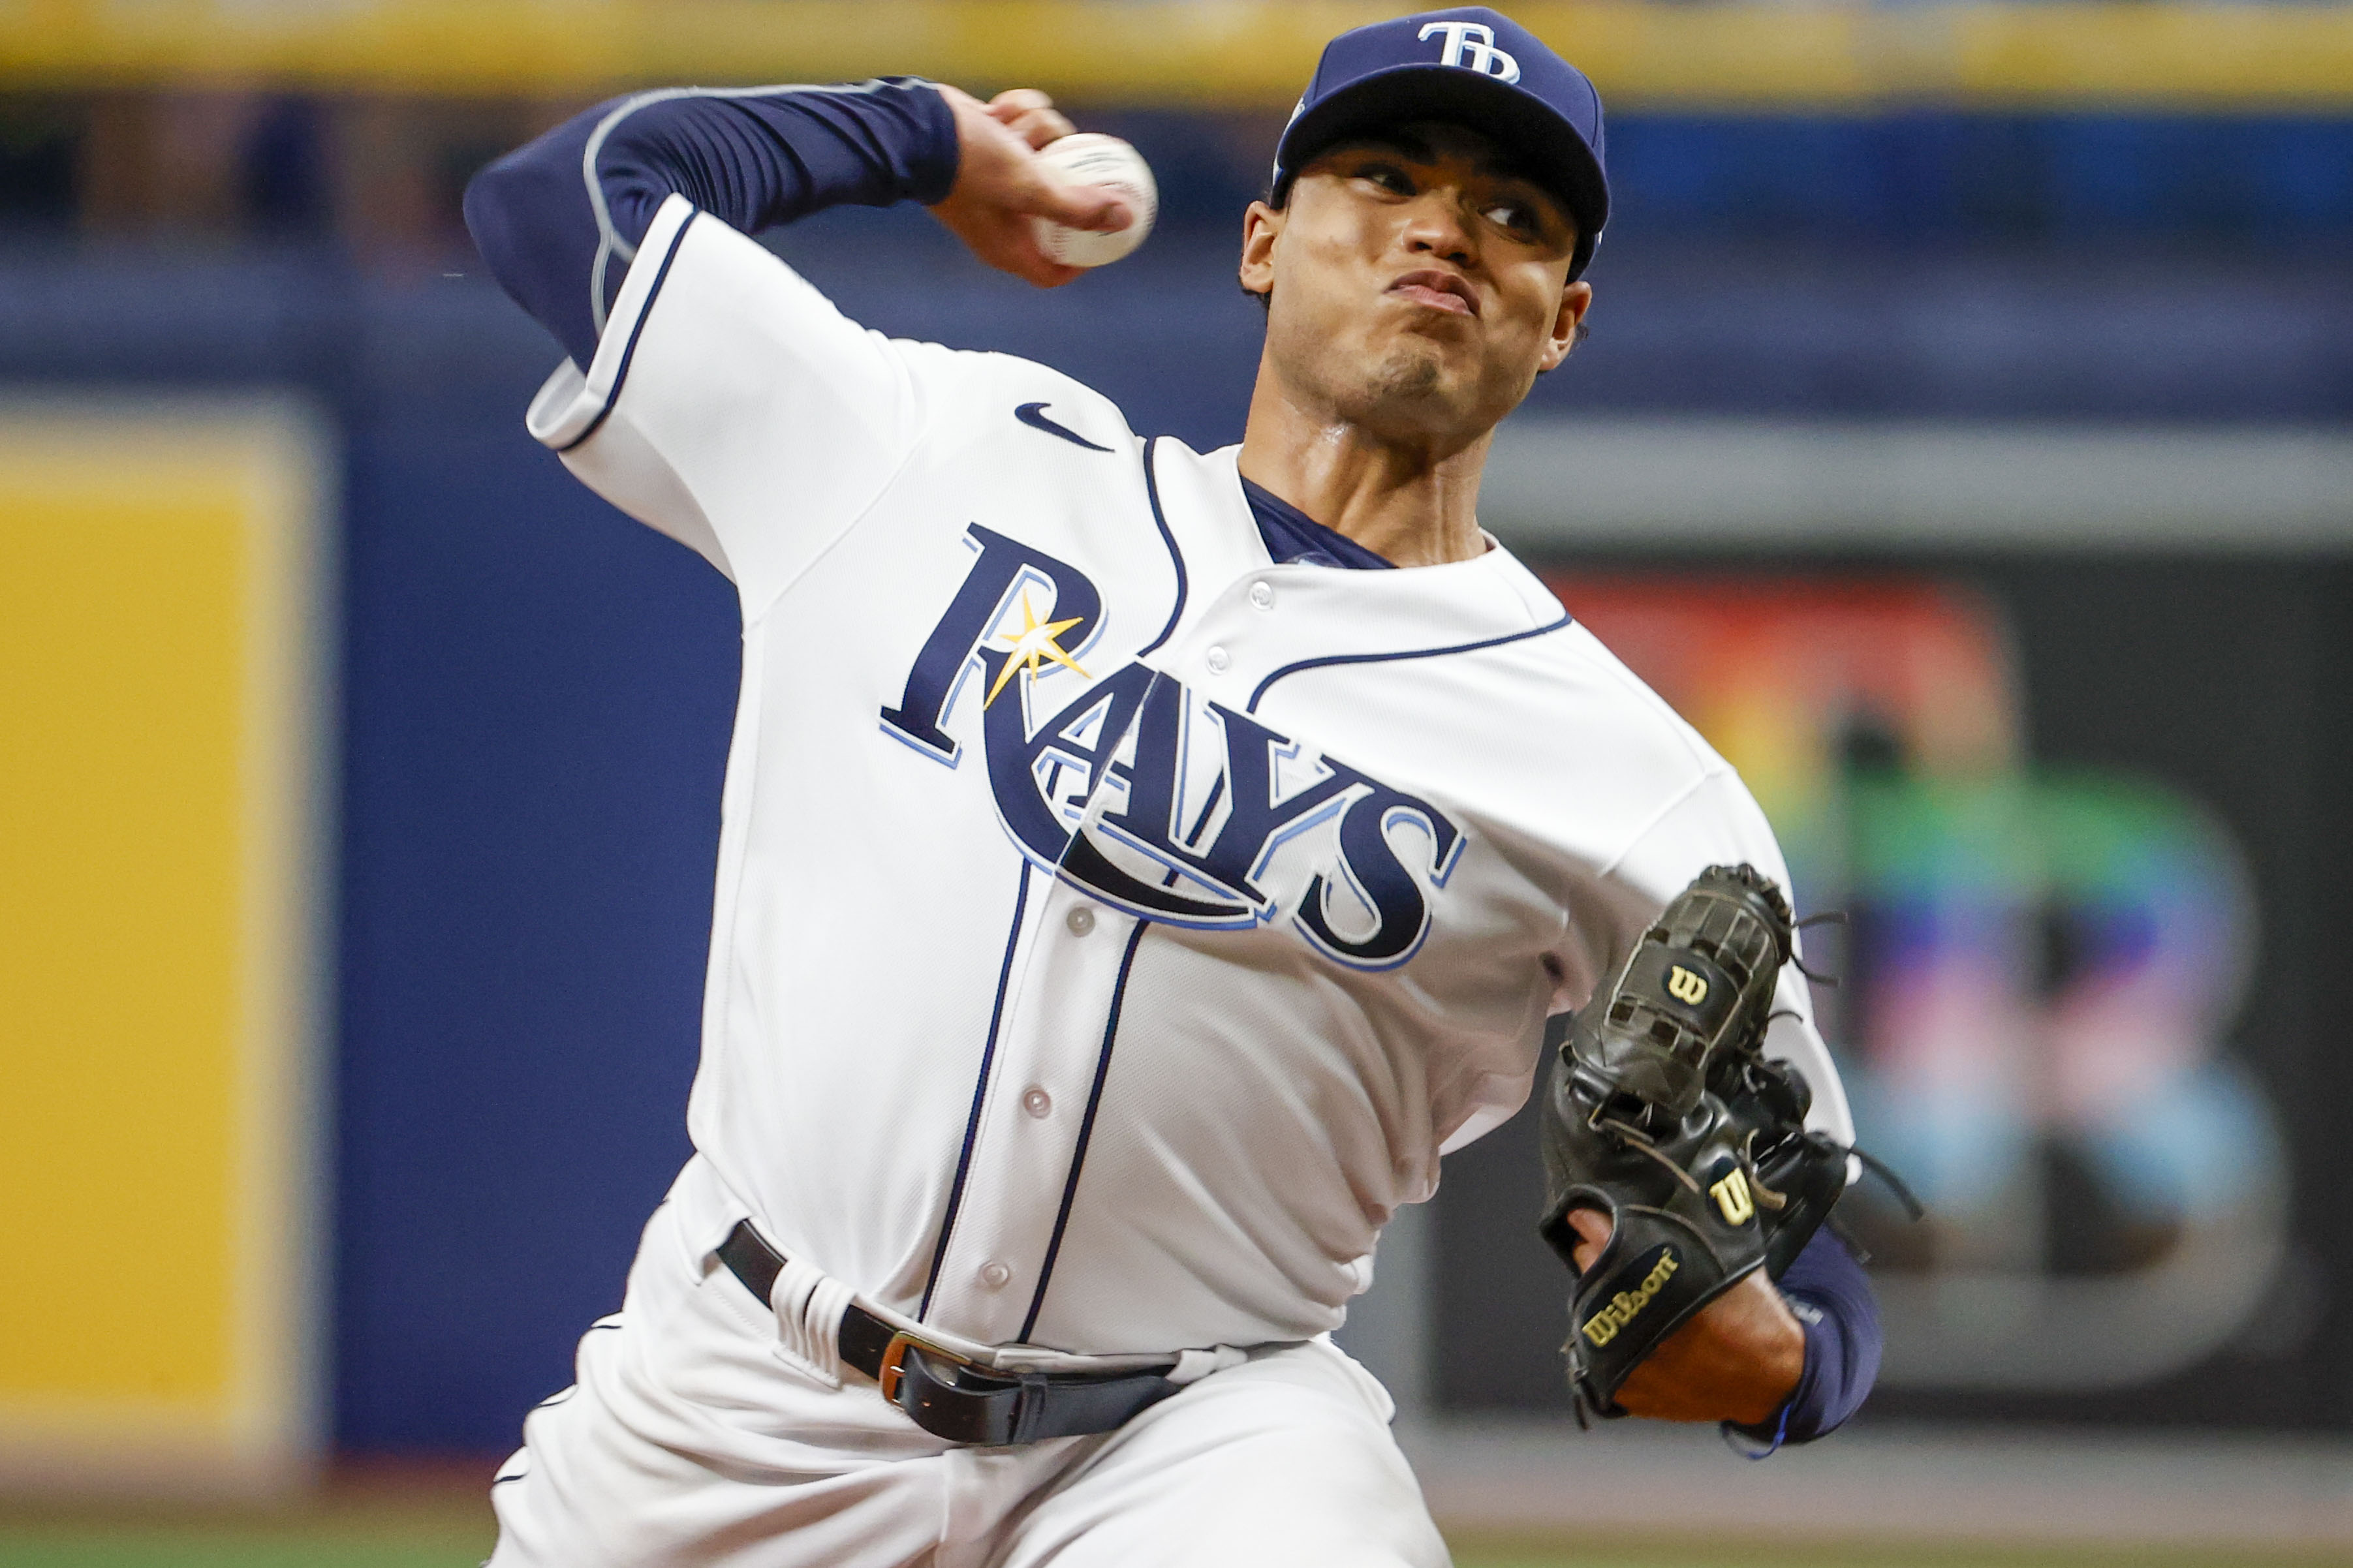 Royals vs. Rays Probable Starting Pitching - June 22